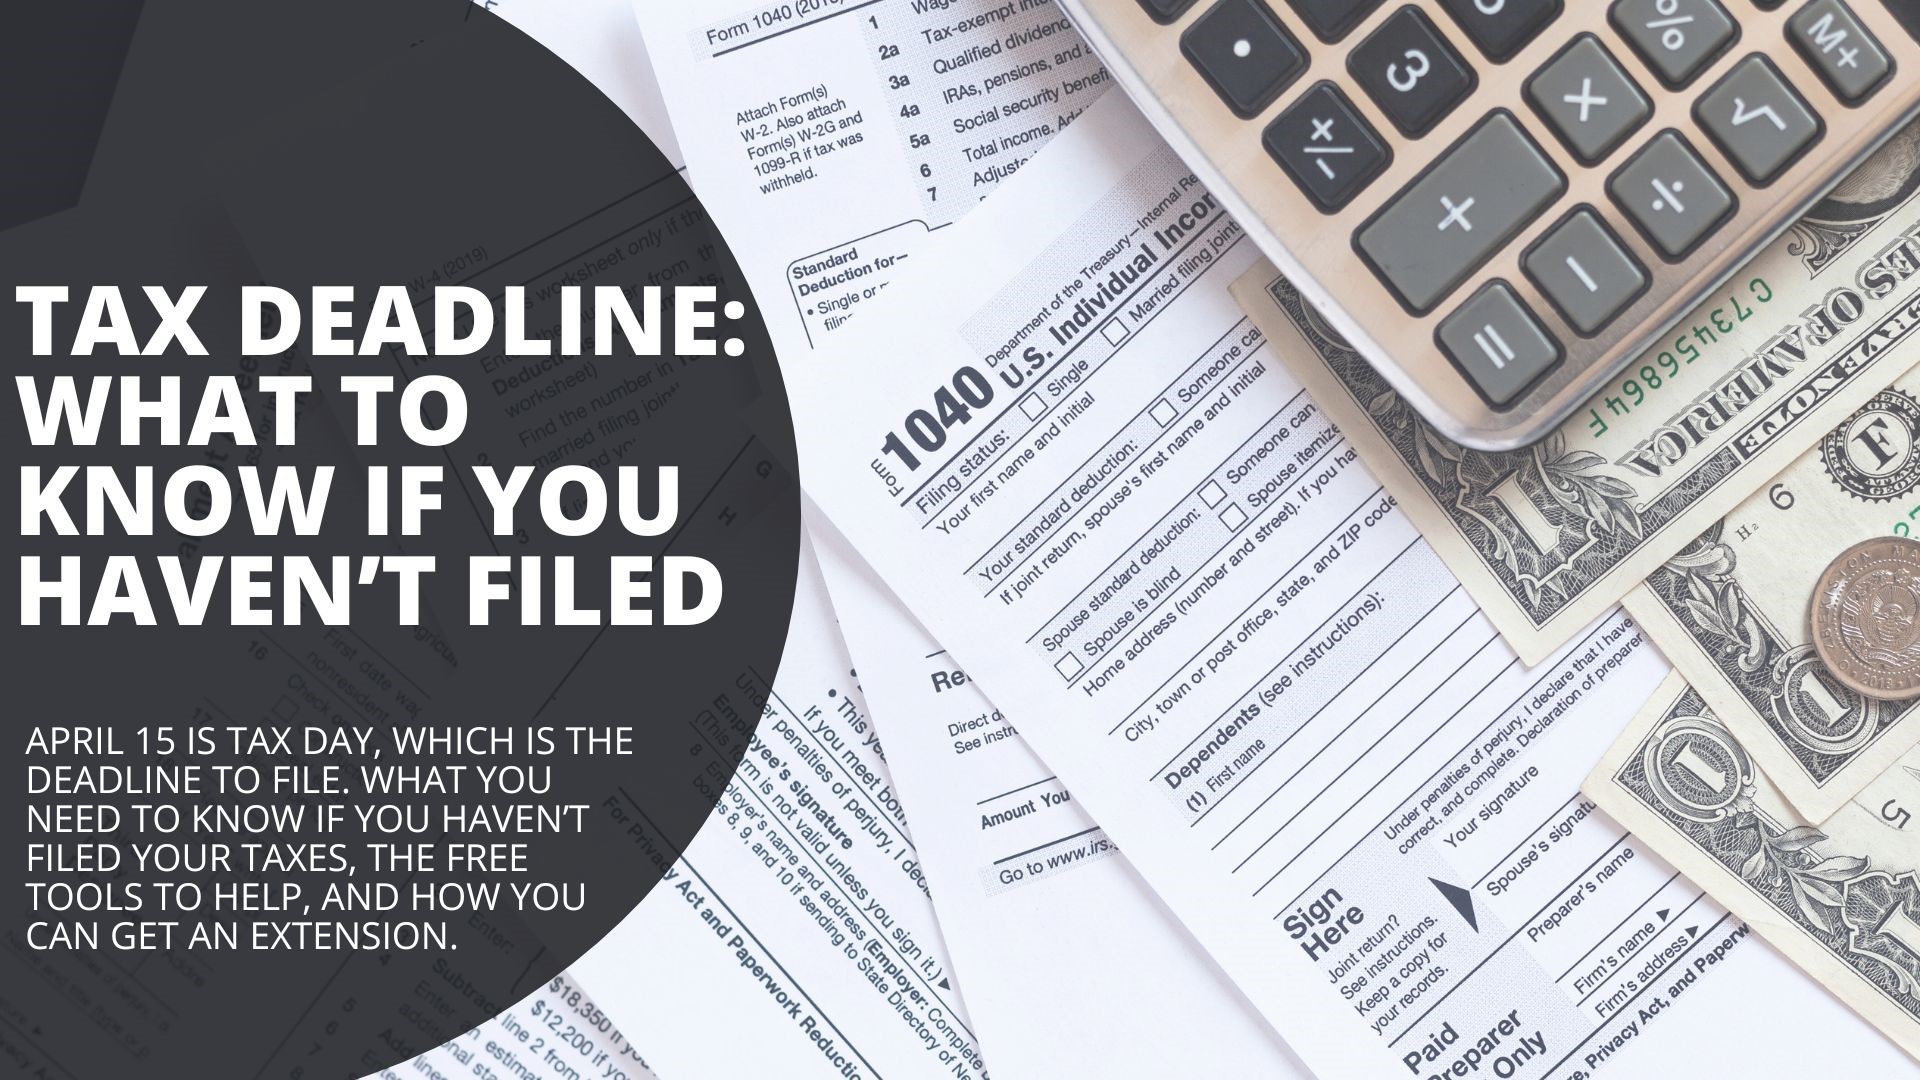 April 15 is Tax Day, which is the deadline to file. What you need to know if you haven’t filed your taxes, the free tools to help, and how you can get an extension.